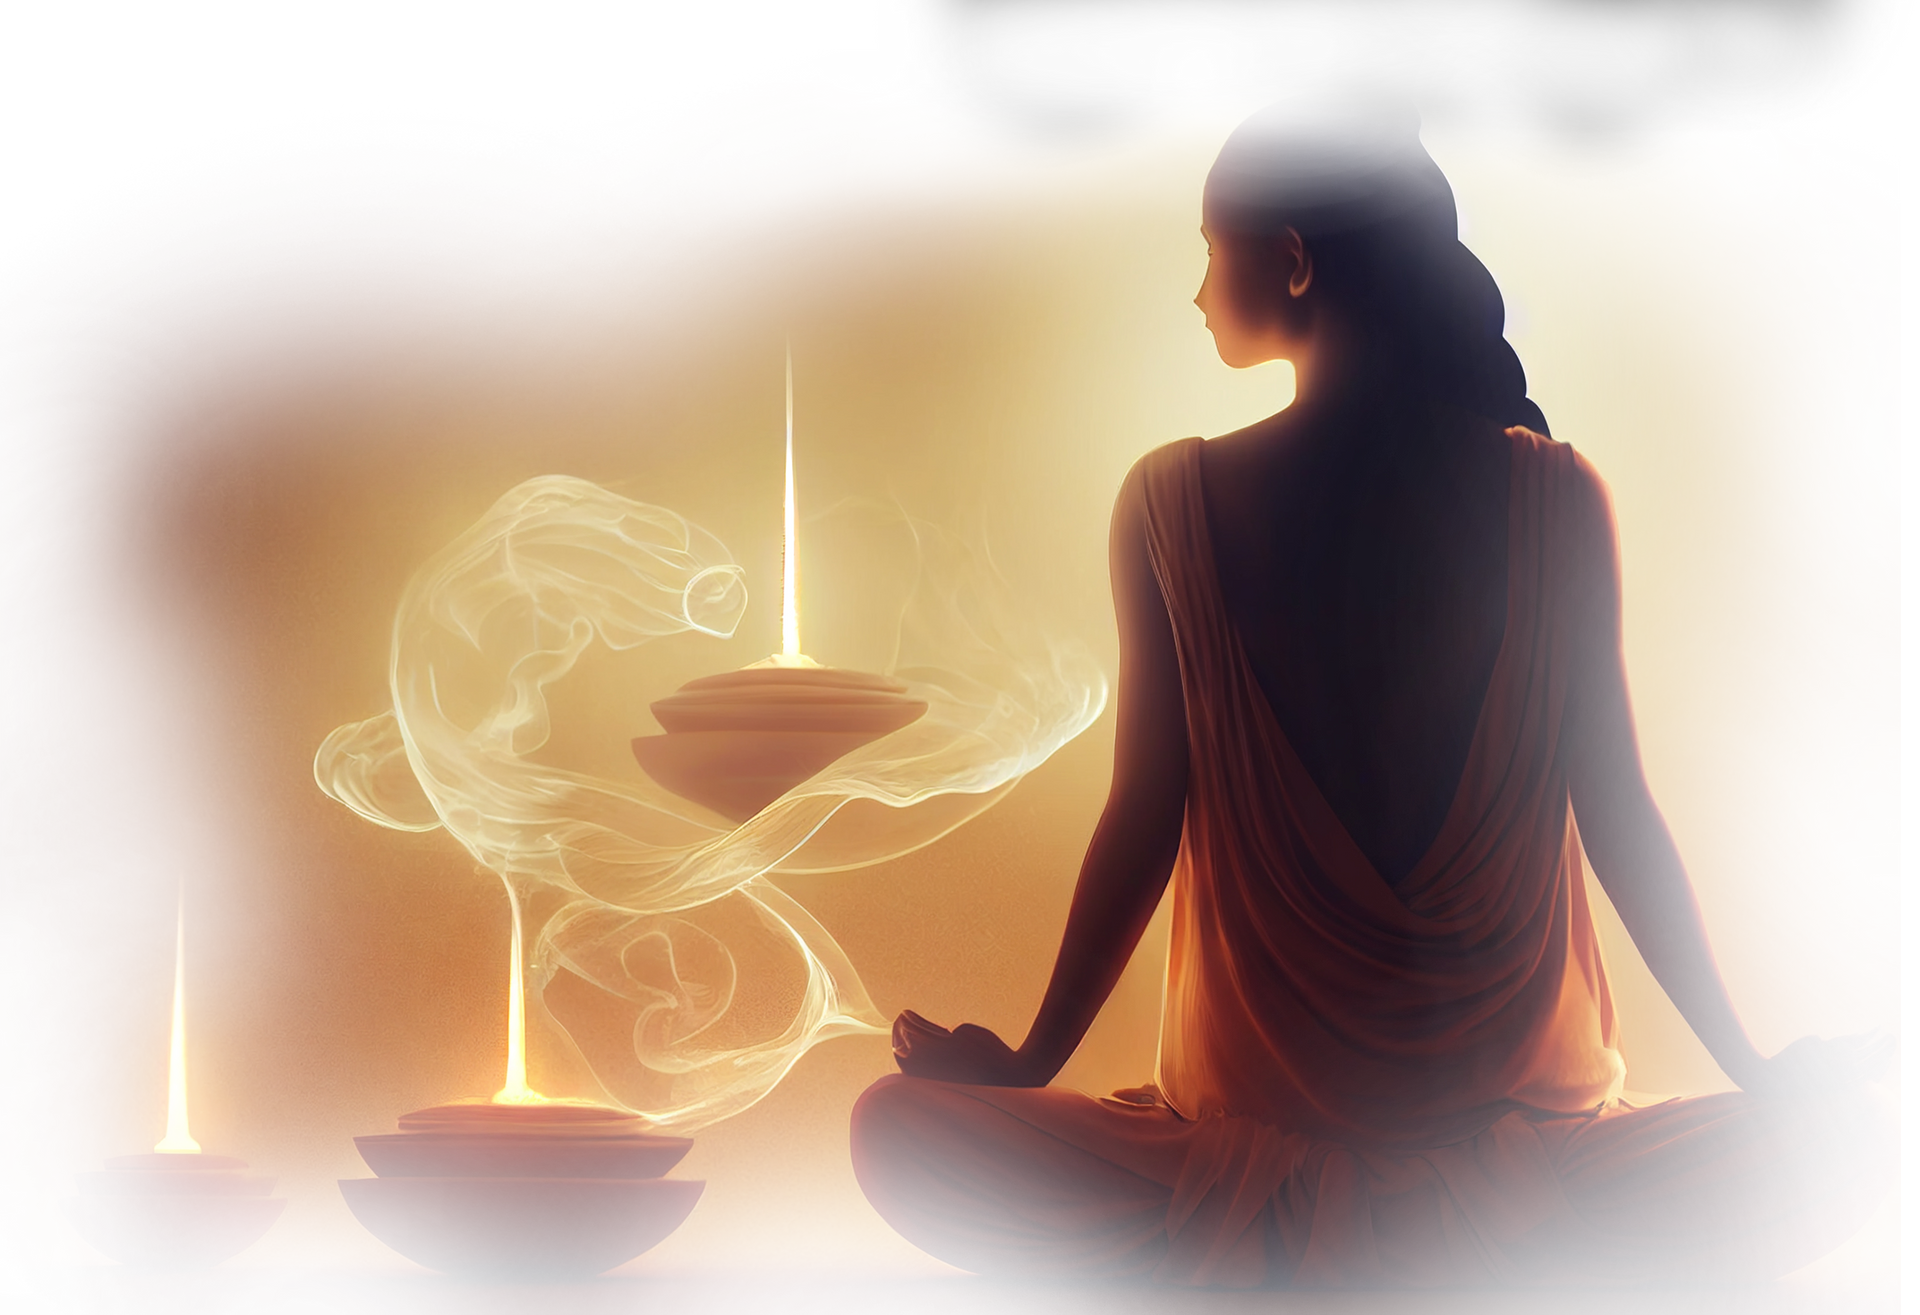 A woman is sitting in a lotus position with candles in the background.